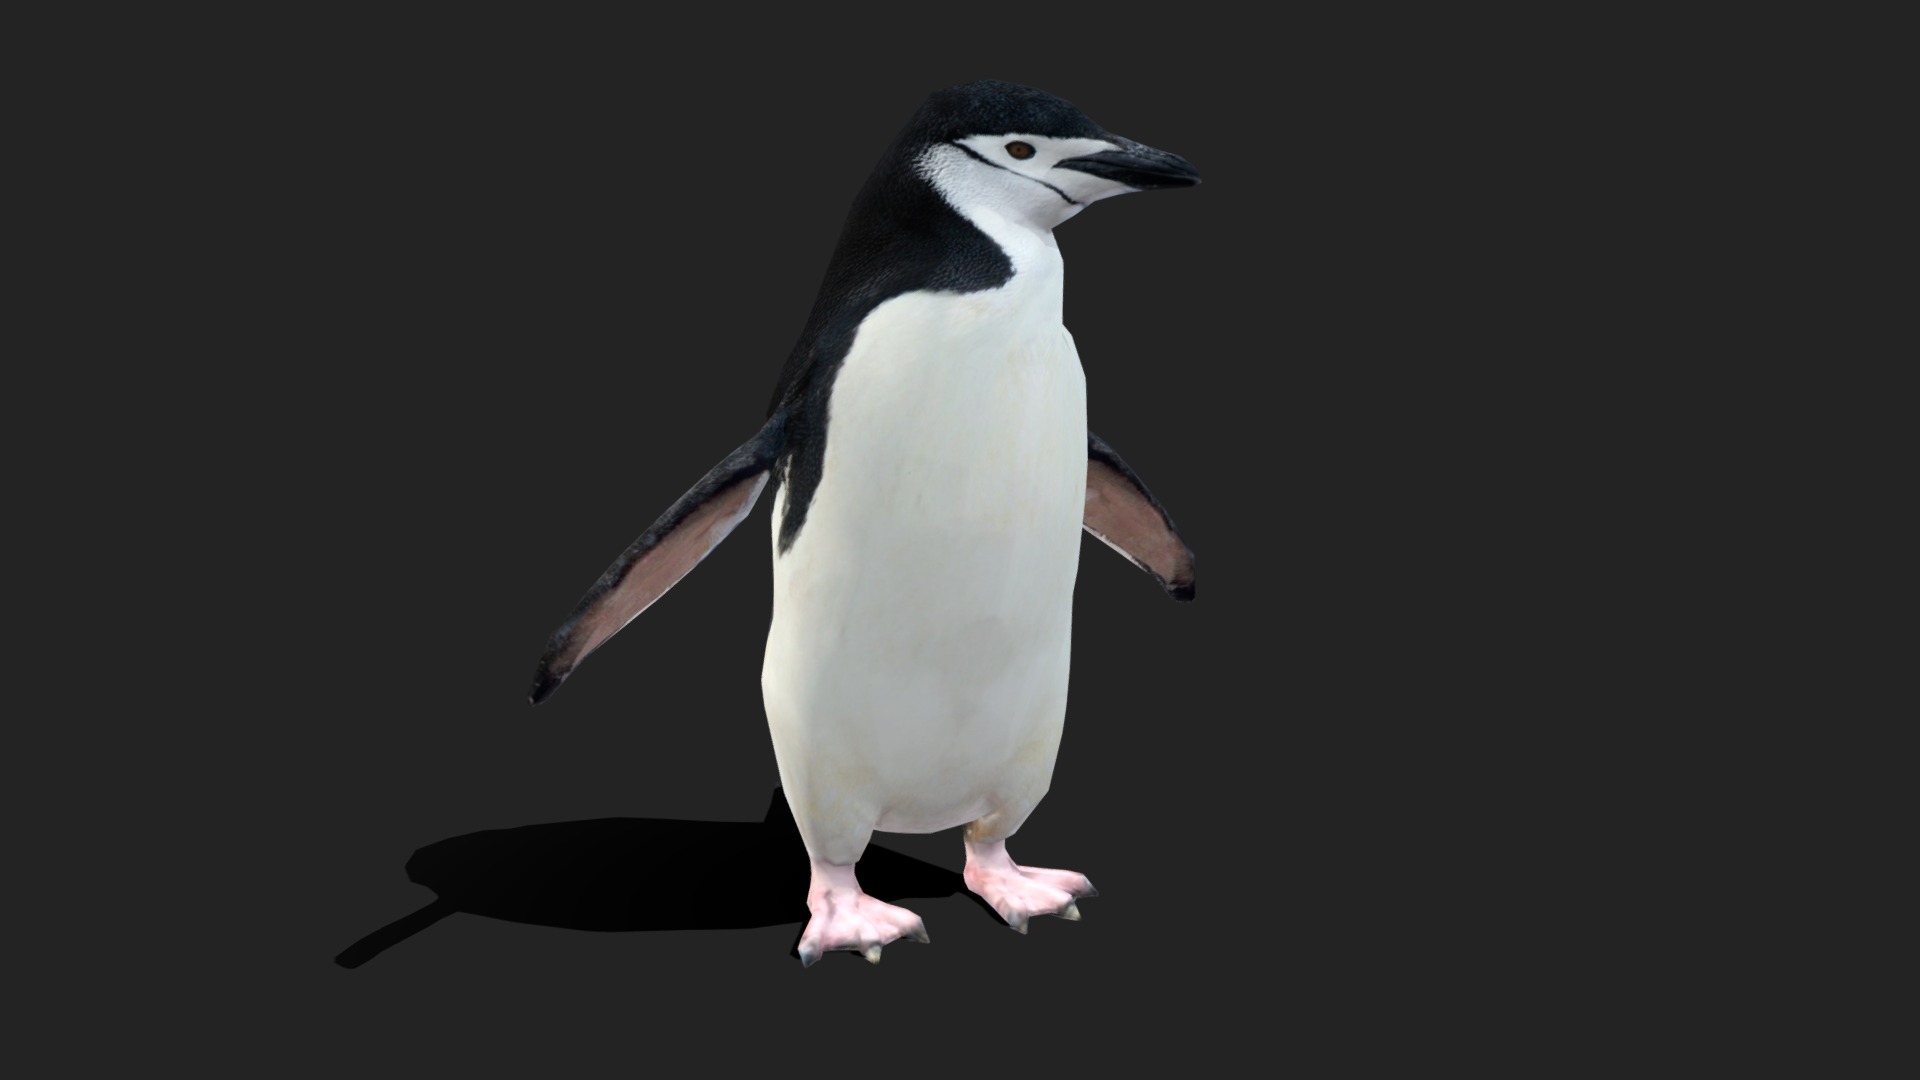 3D model Low Poly Chinstrap Penguin - This is a 3D model of the Low Poly Chinstrap Penguin. The 3D model is about a penguin standing on a black background.